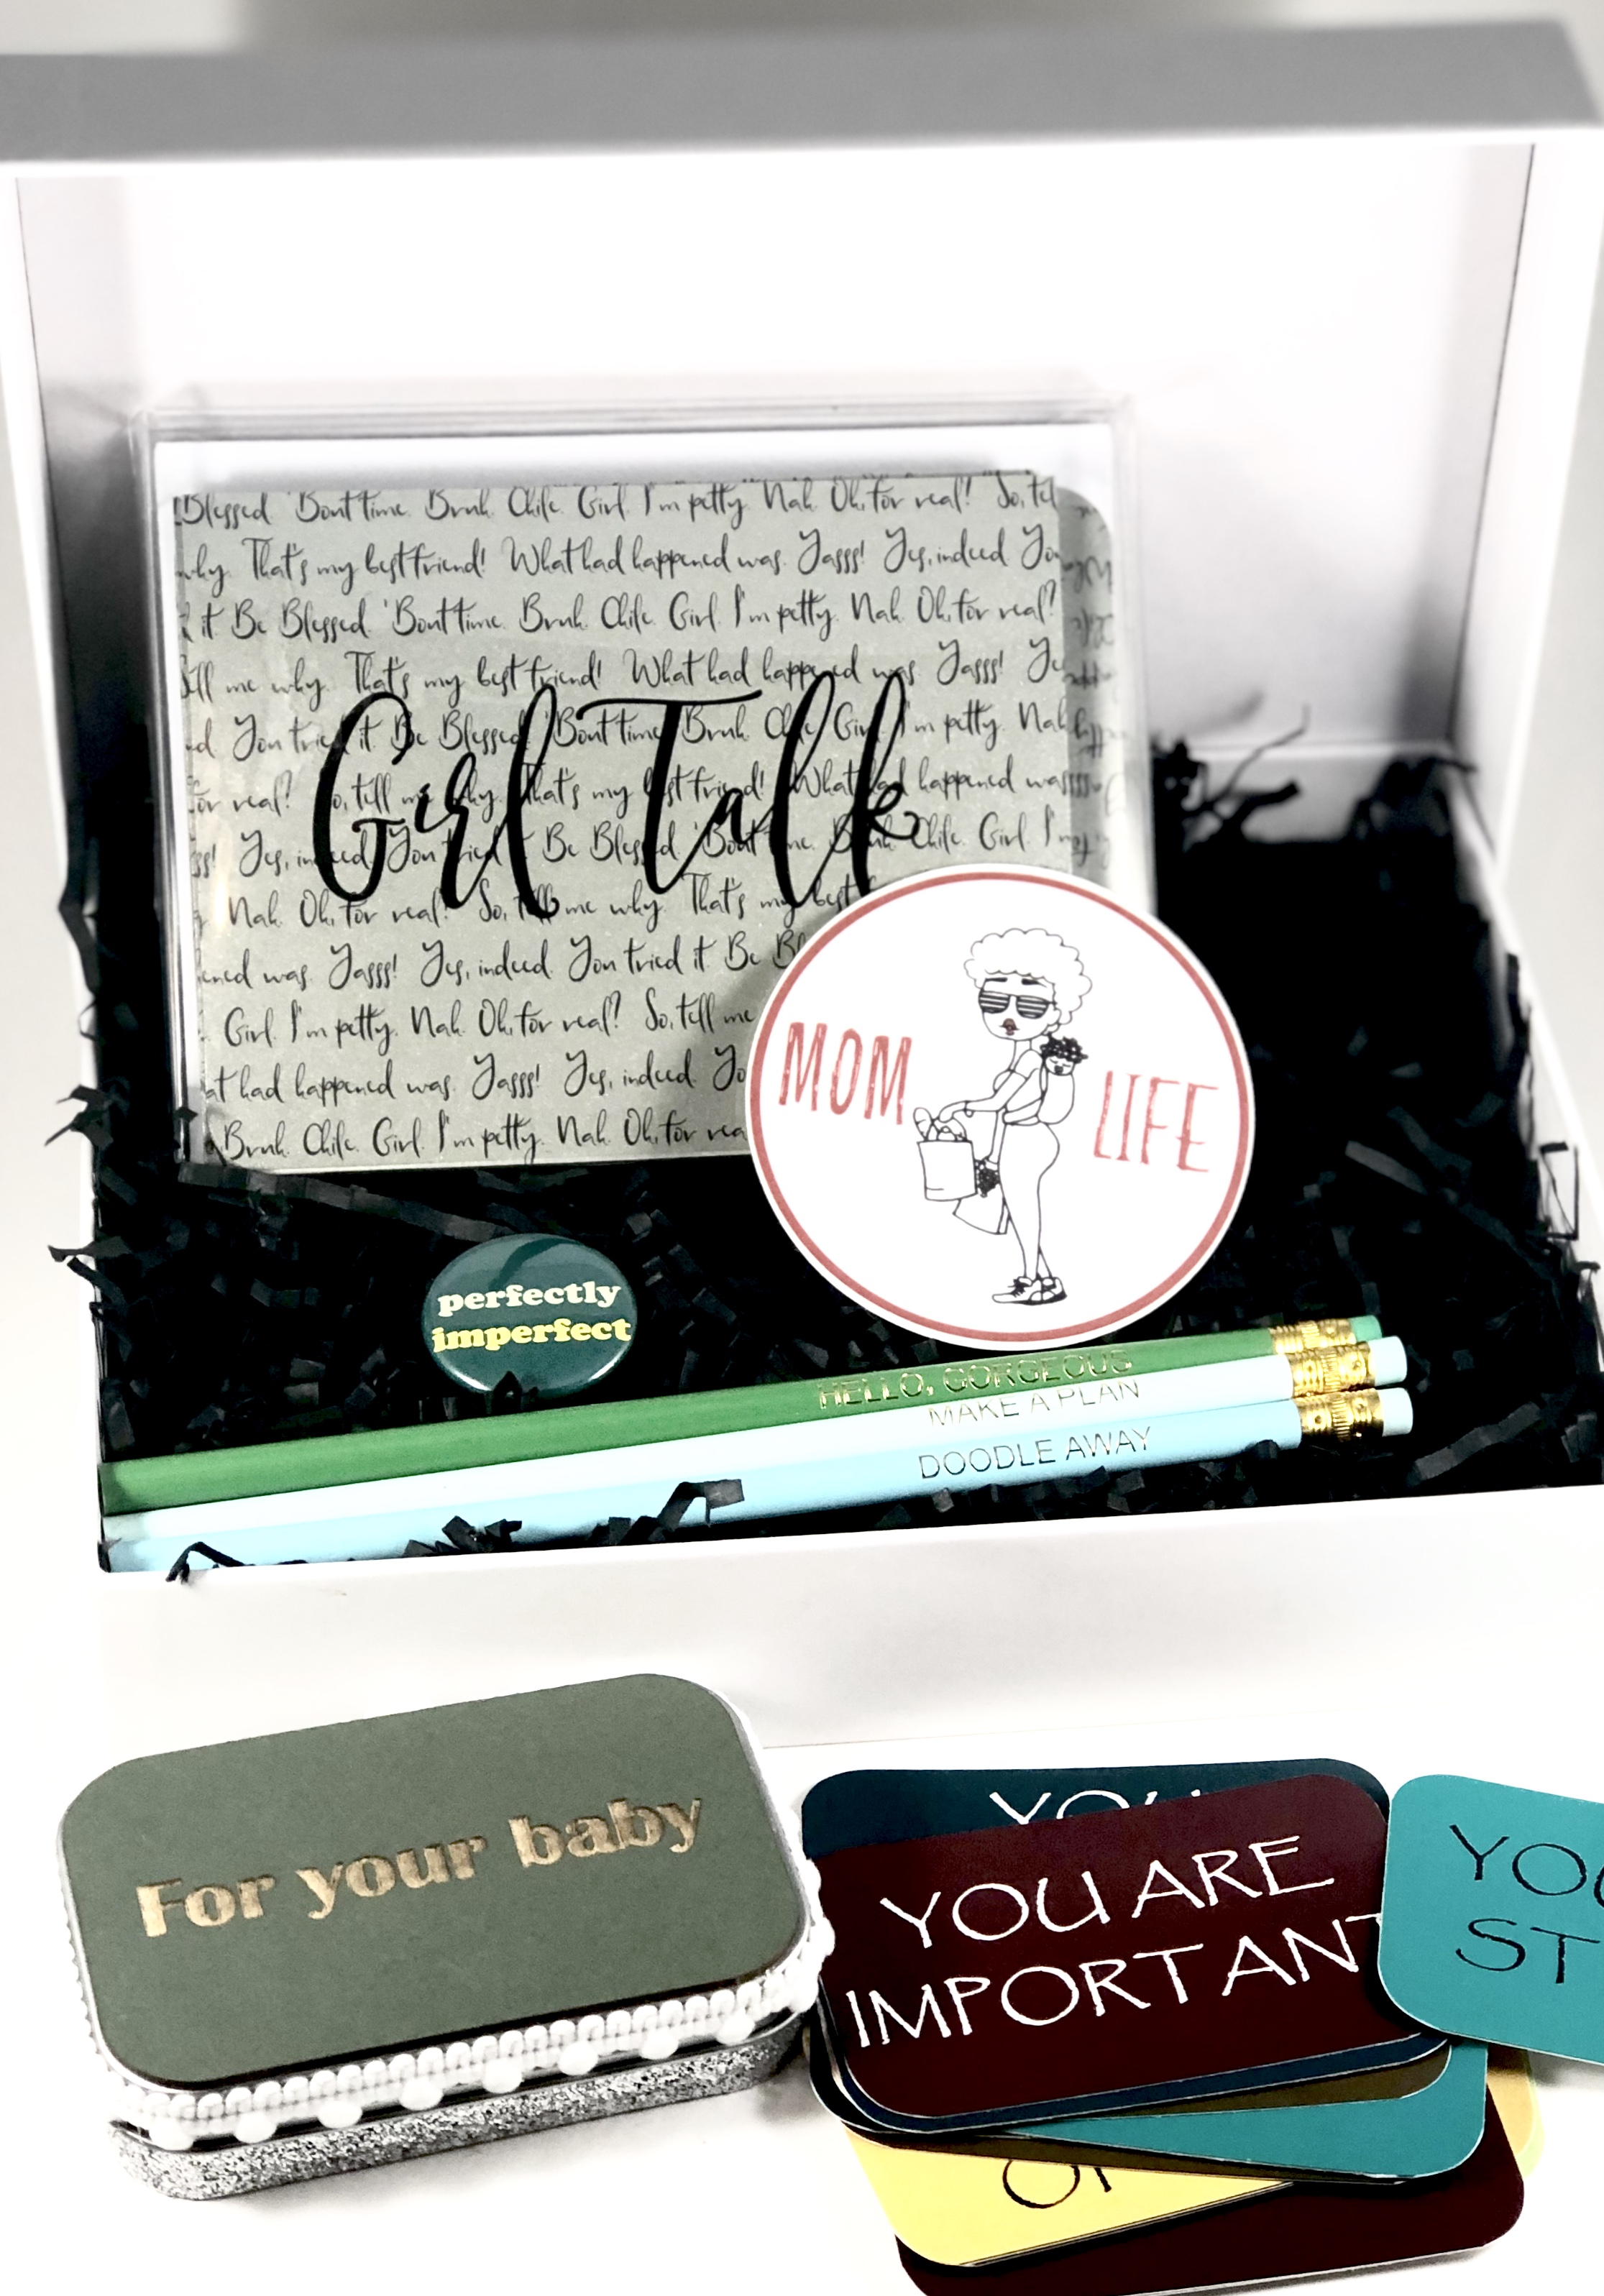 MikMont Creations custom gift pack with card, pencils, affirmation tin with laser etch lid